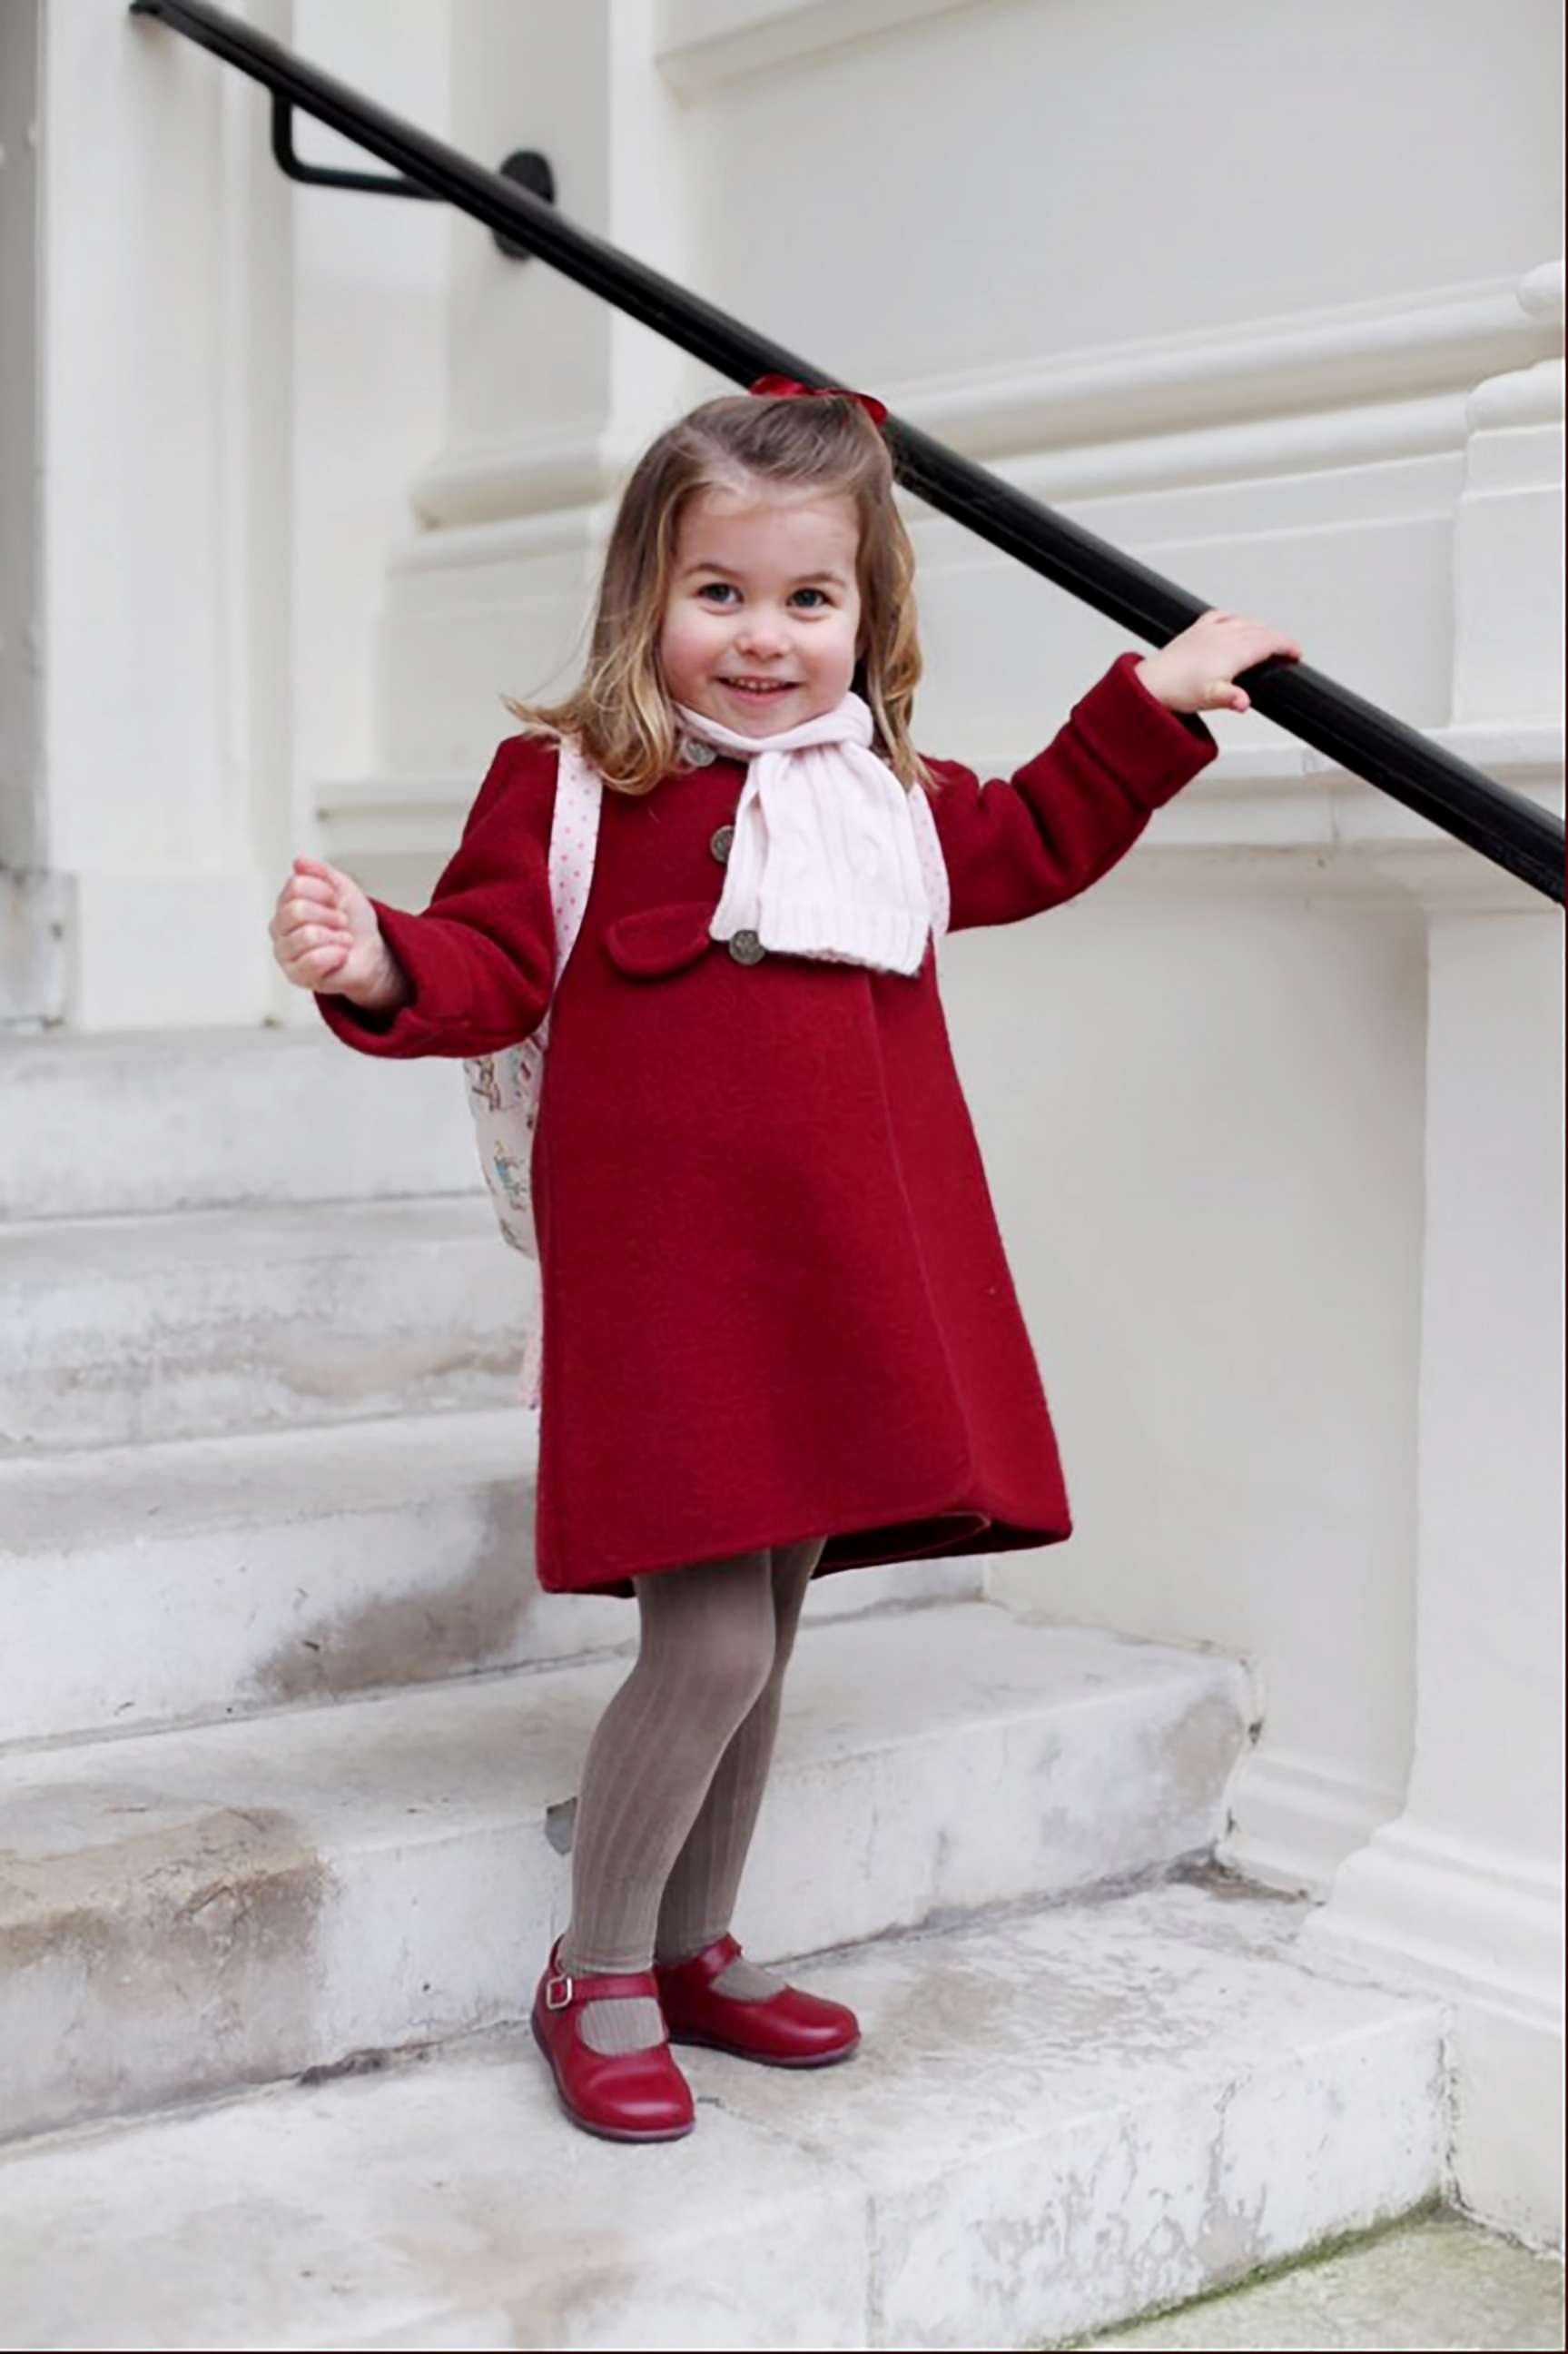 PHOTO: Princess Charlotte prepares to attend her first day at school in this photo posted on Twitter by Kesington Palace.